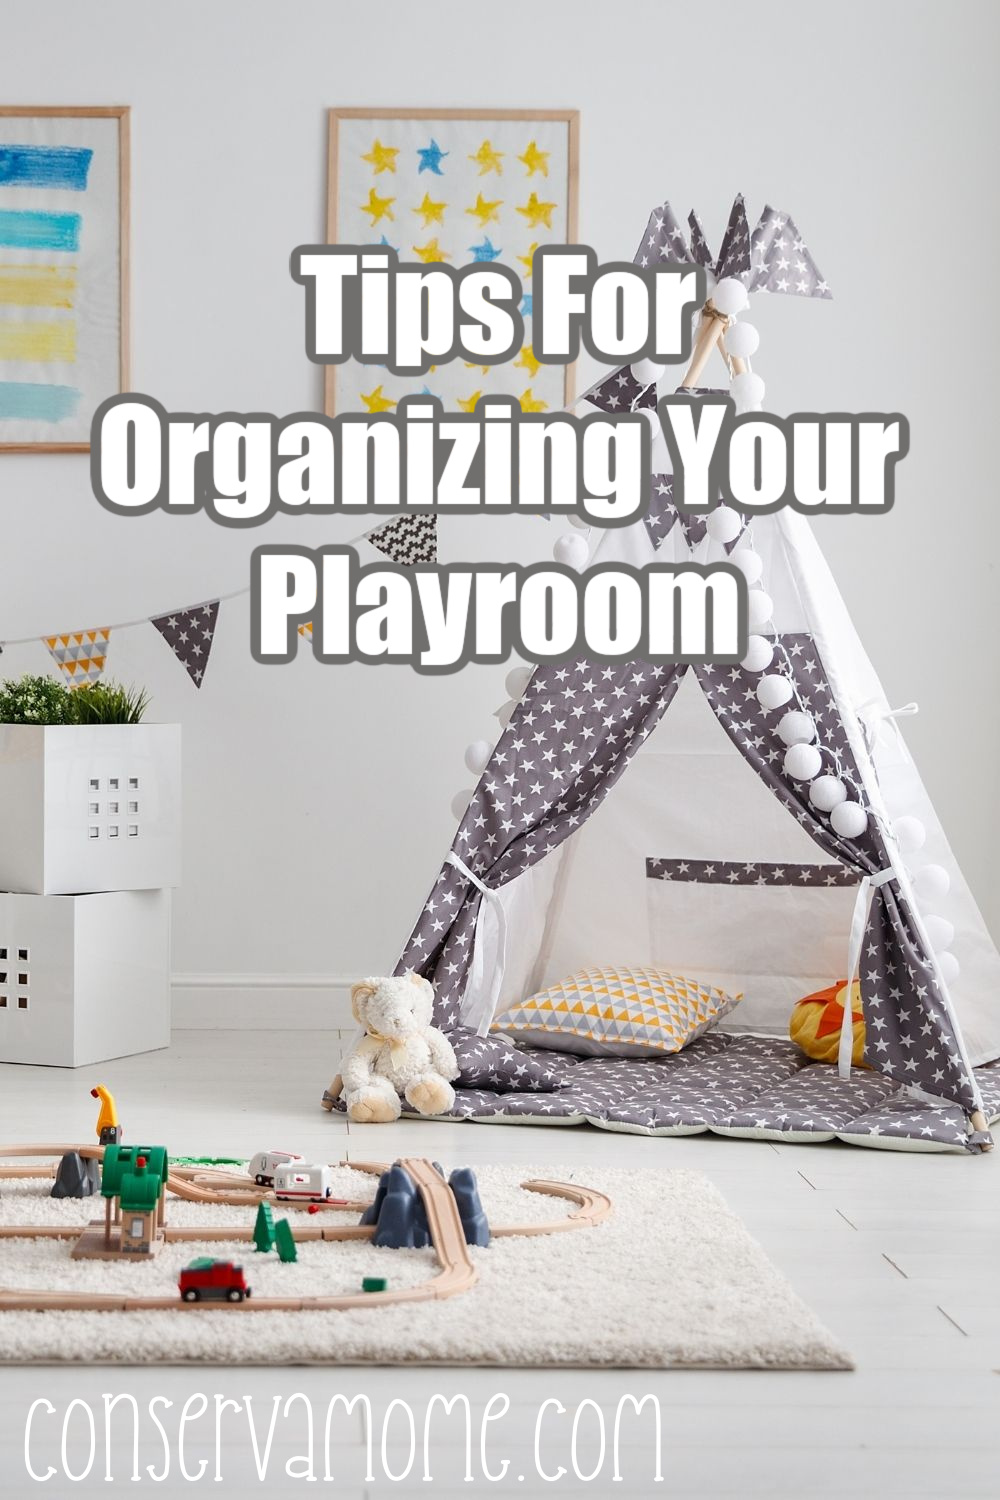 Tips for Organizing your Playroom